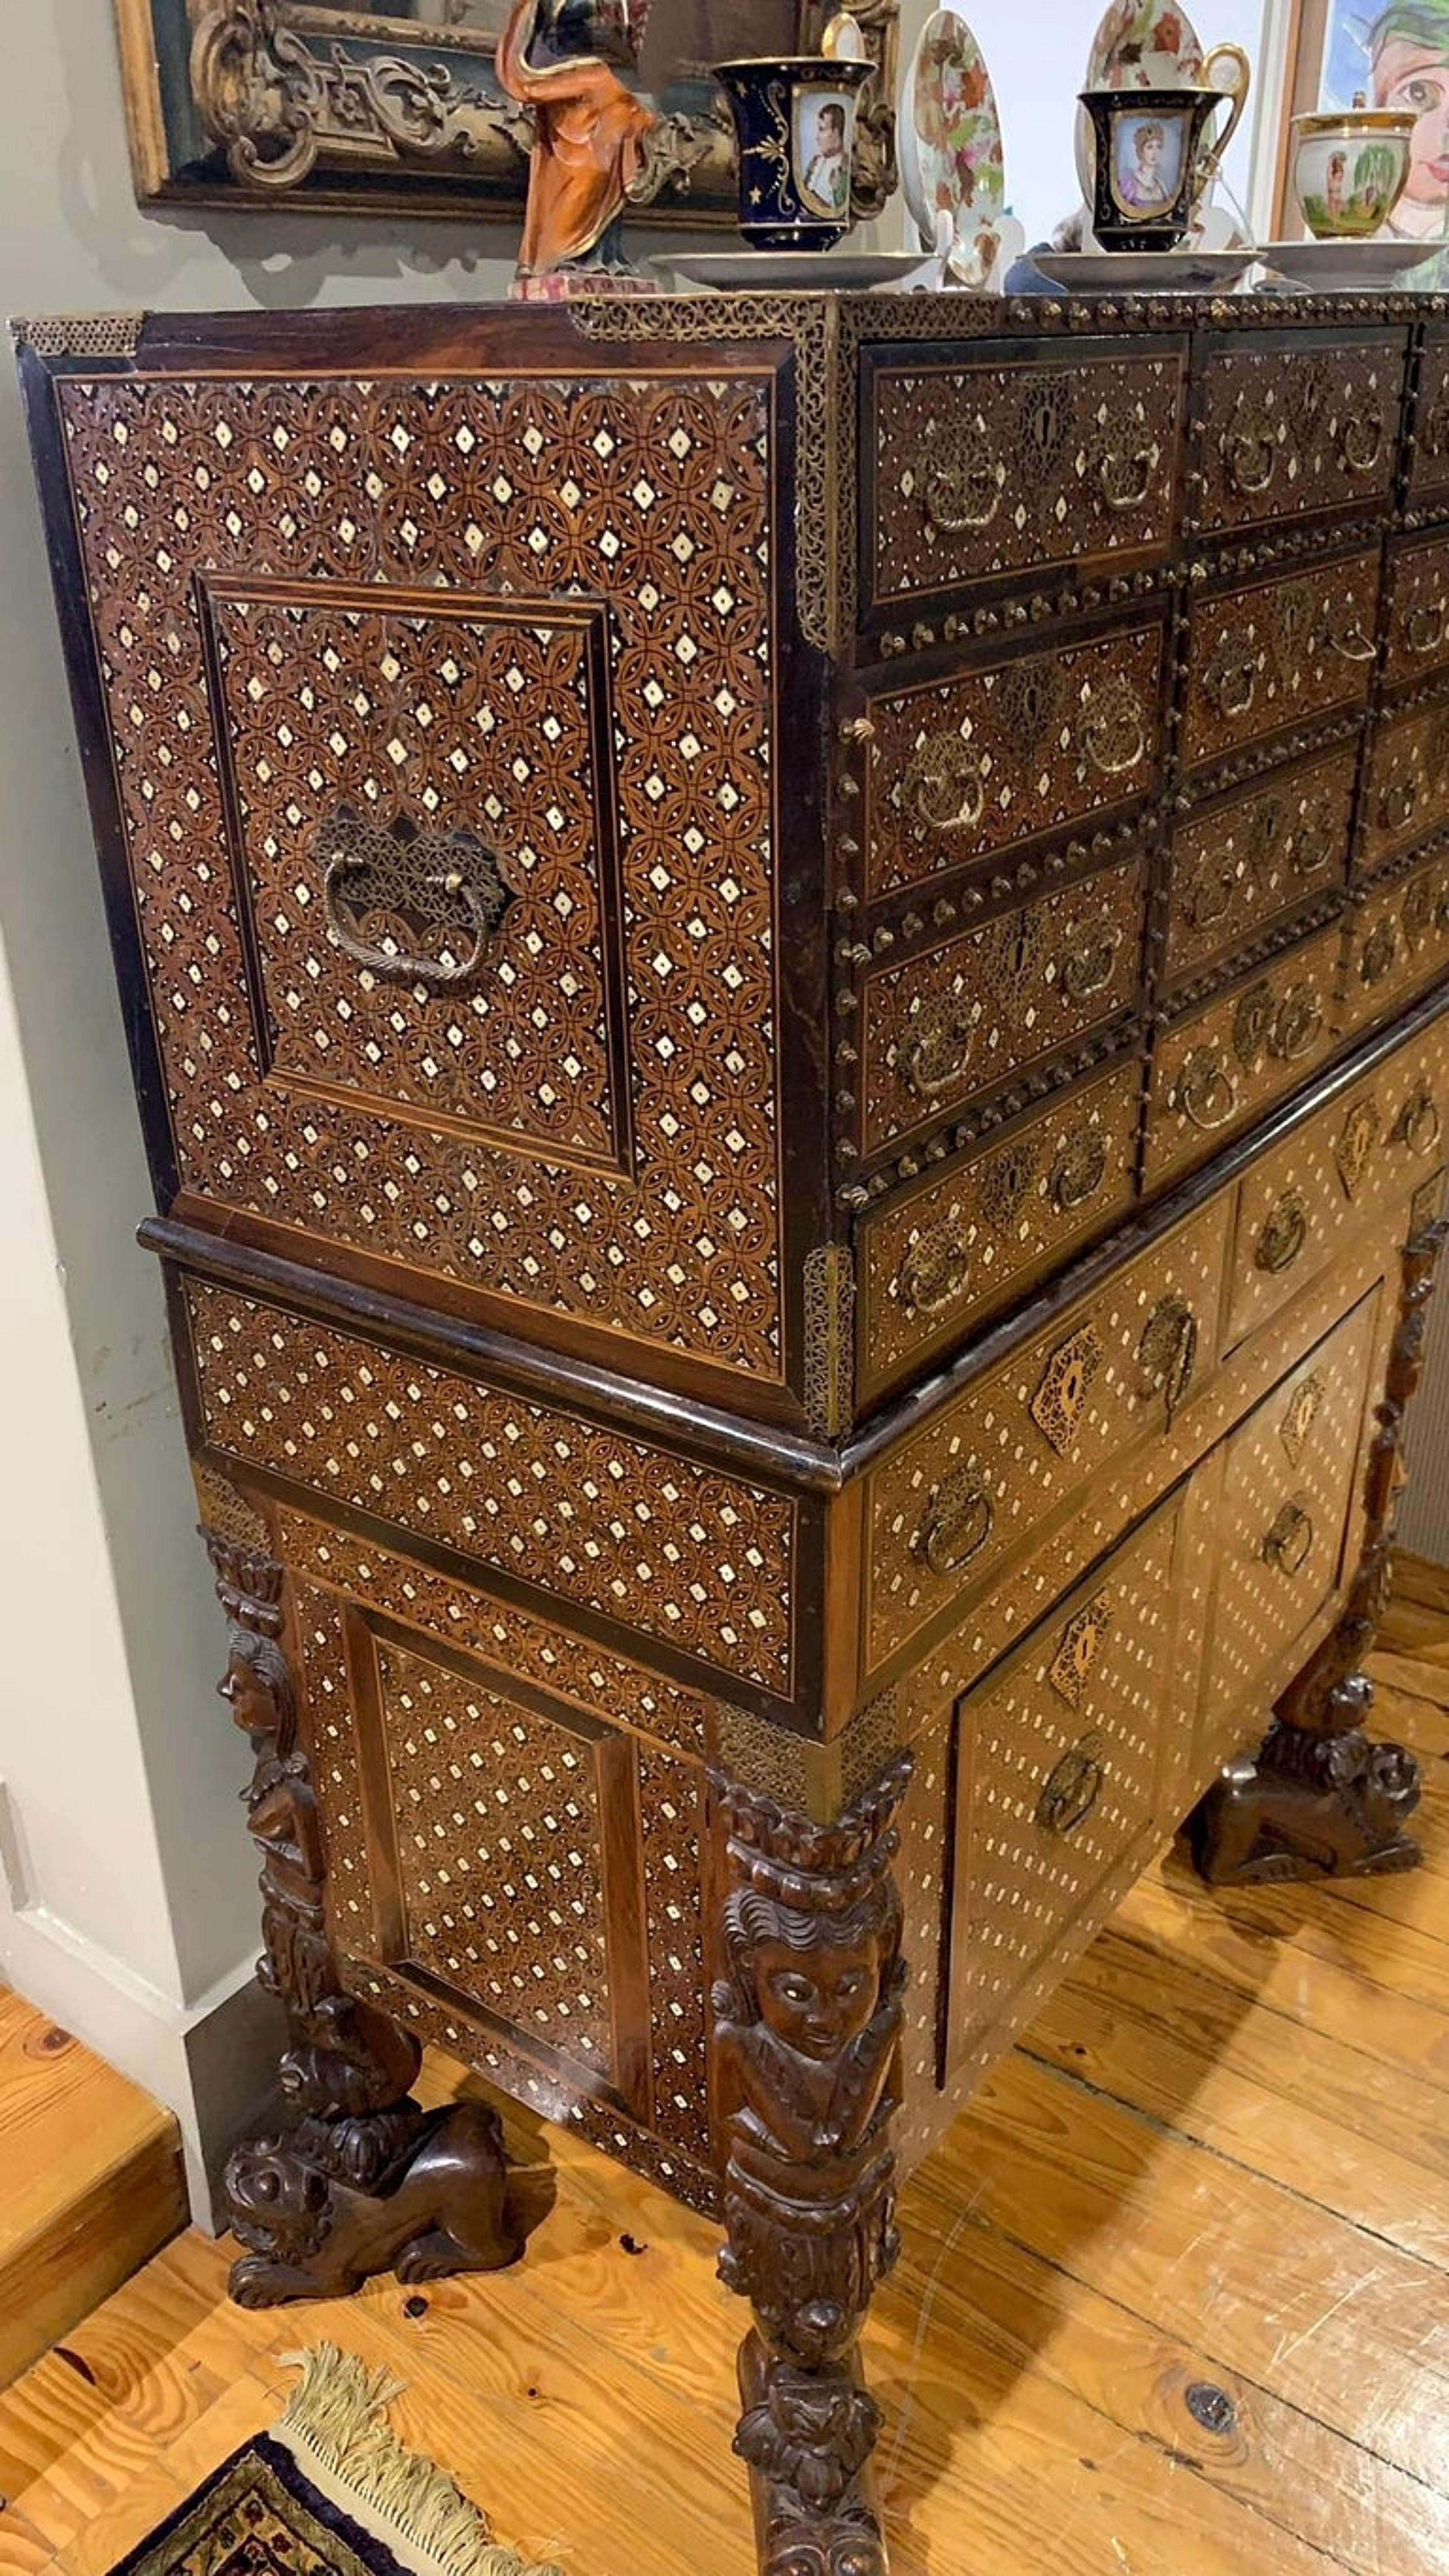 Hand-Crafted Important Counter with Trimpe, Indo-Portuguese 17th Century